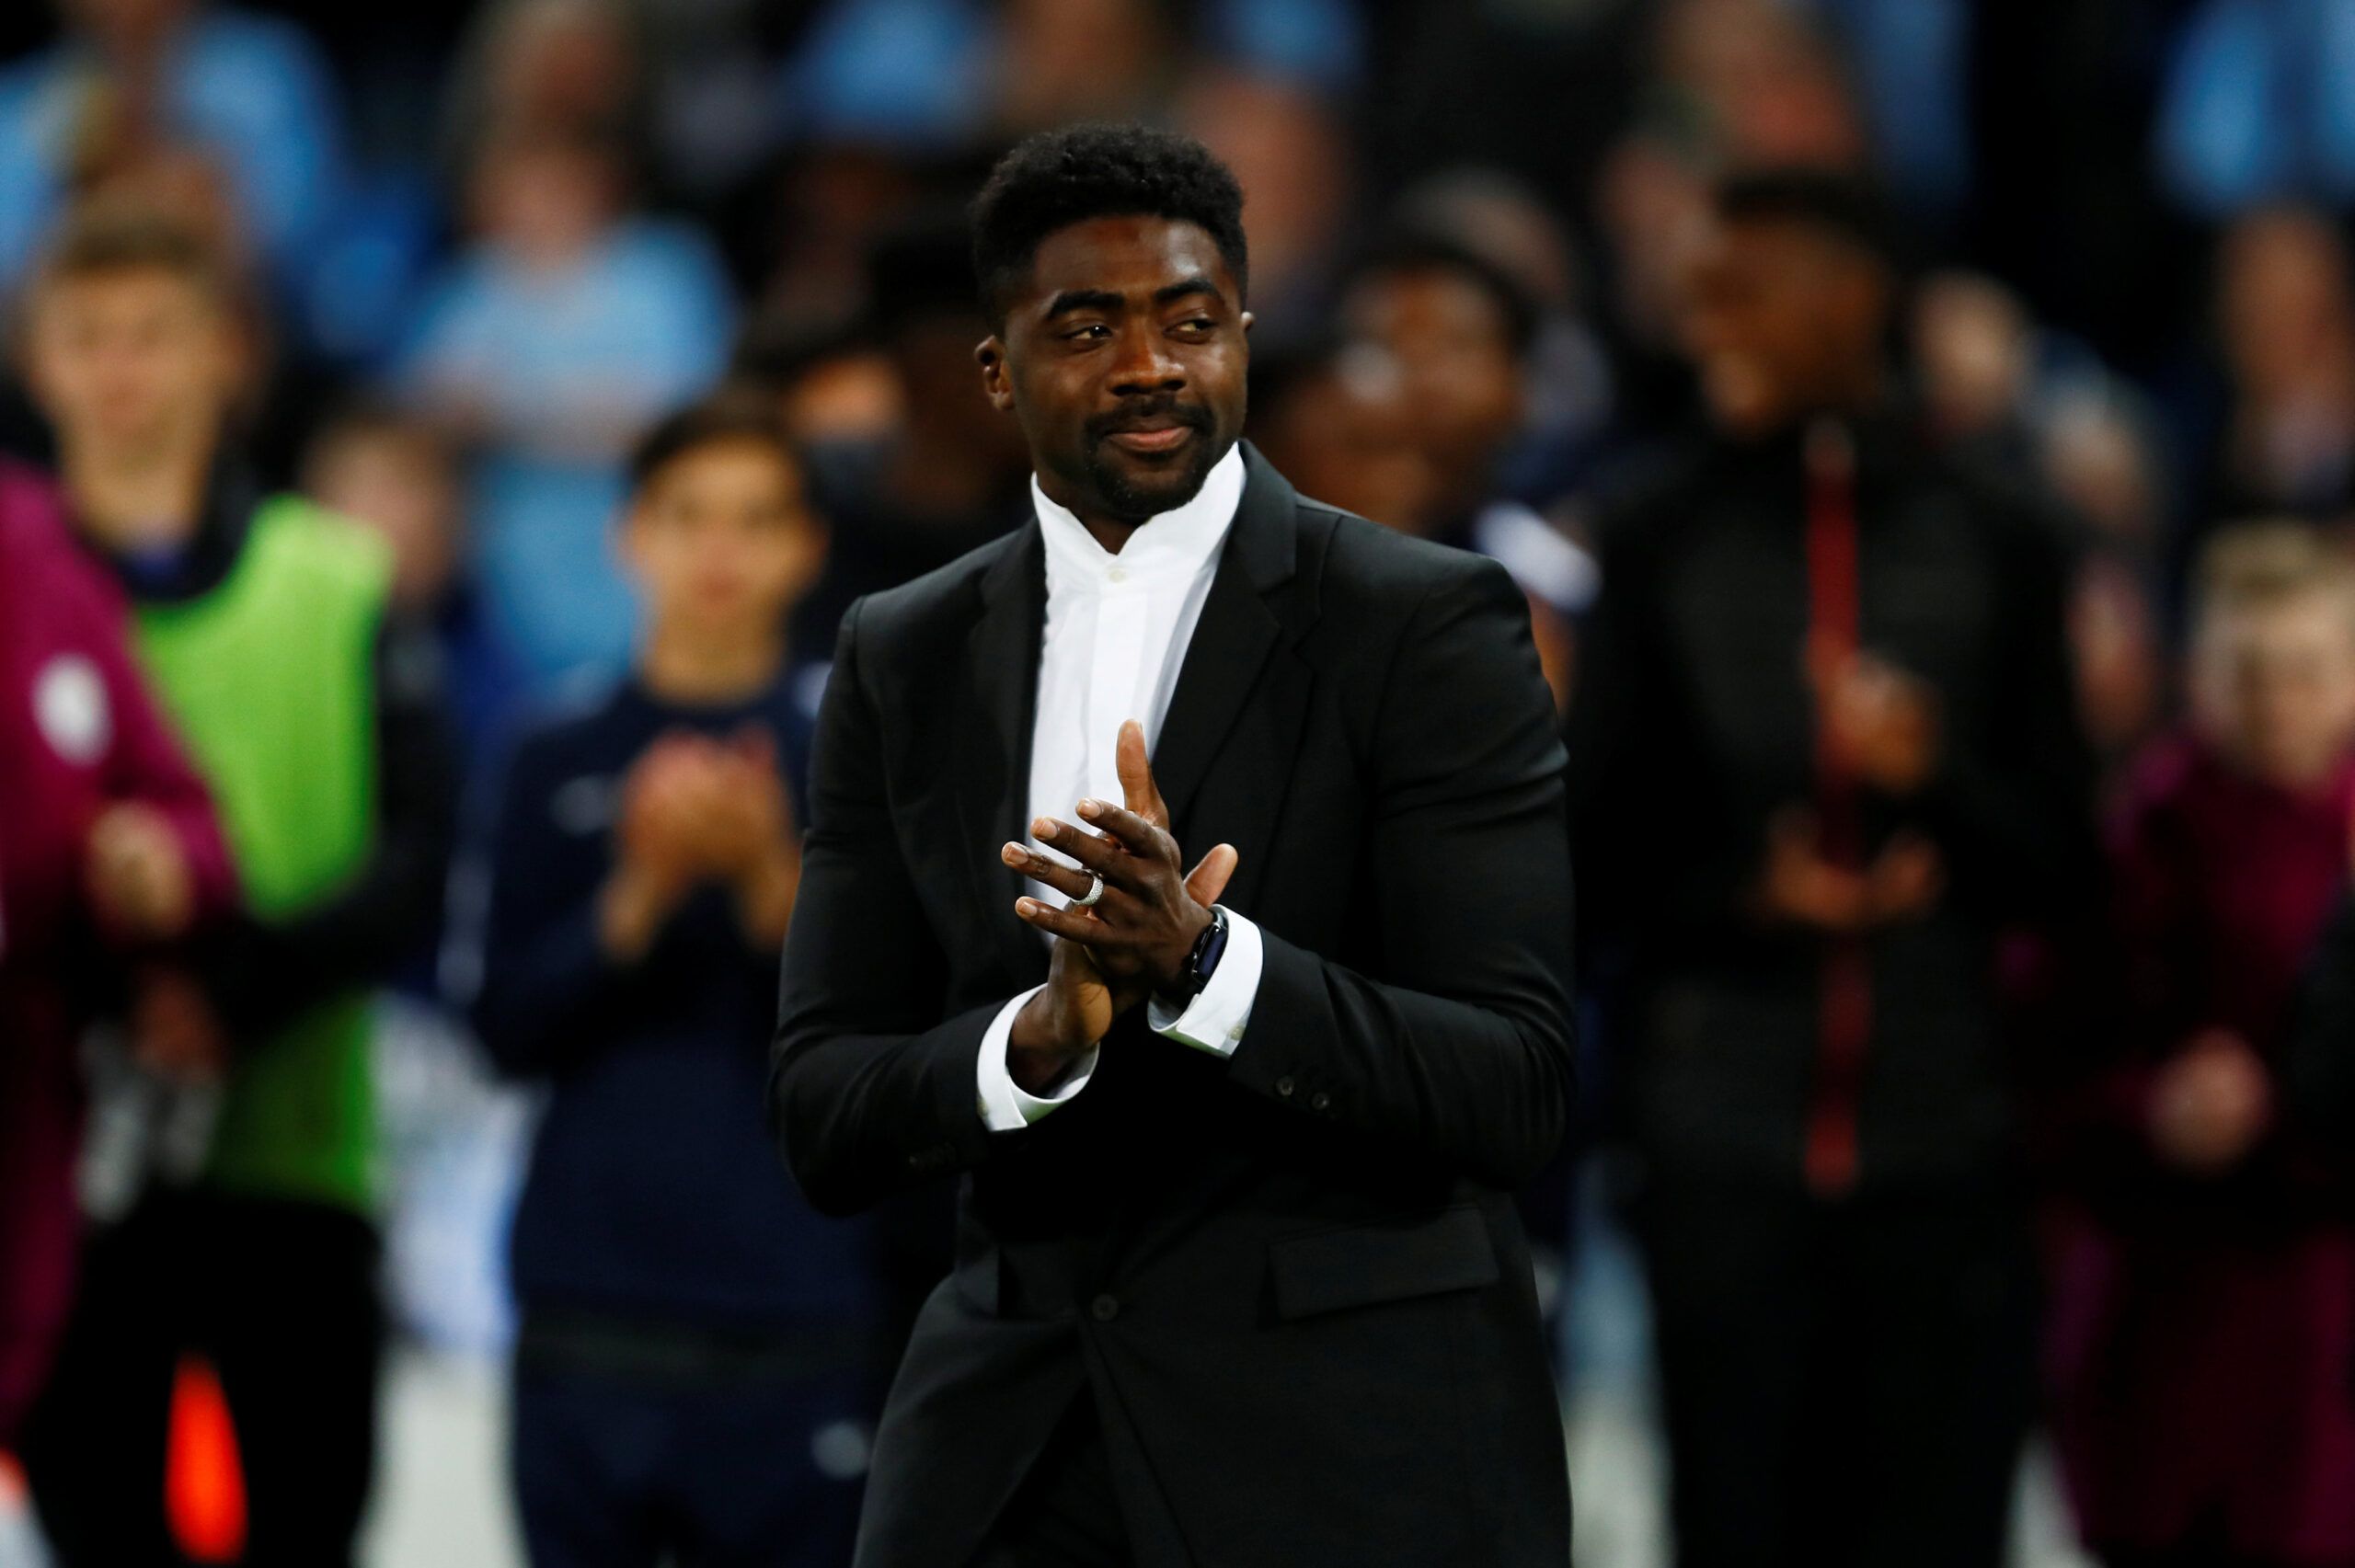 Soccer Football - Premier League - Manchester City v Brighton &amp; Hove Albion - Etihad Stadium, Manchester, Britain - May 9, 2018   Kolo Toure applauds during a ceremony after the match                       Action Images via Reuters/Jason Cairnduff    EDITORIAL USE ONLY. No use with unauthorized audio, video, data, fixture lists, club/league logos or 